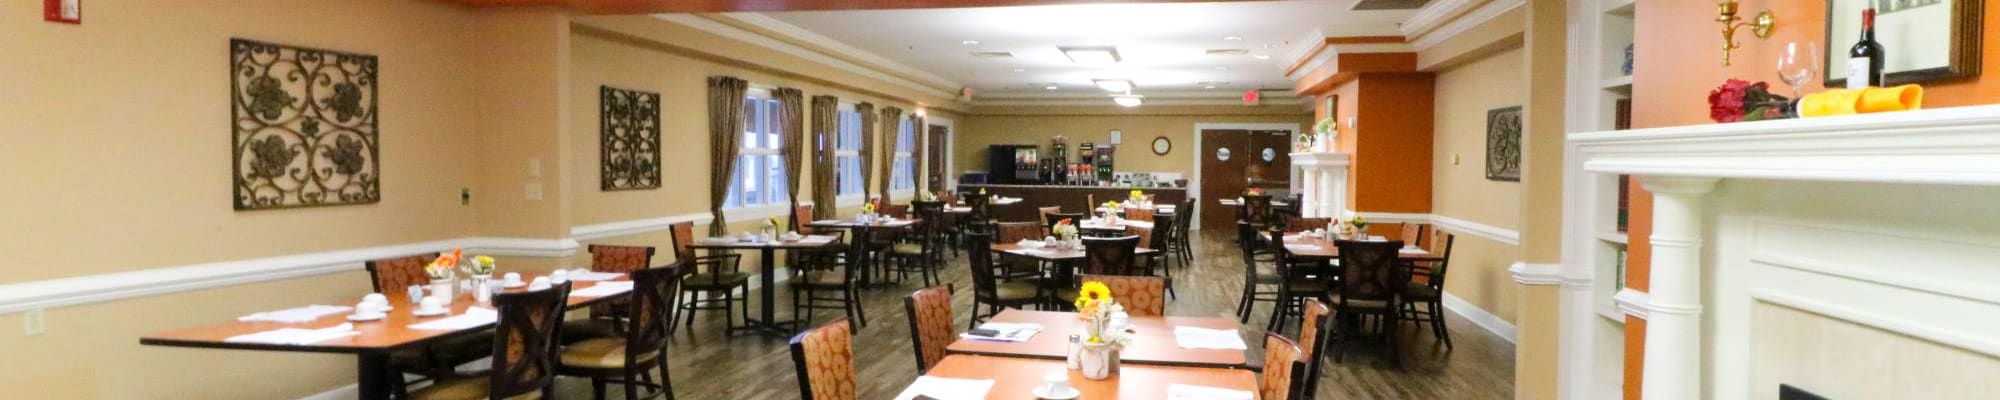 Dining at The Crossings at Ironbridge in Chester, Virginia